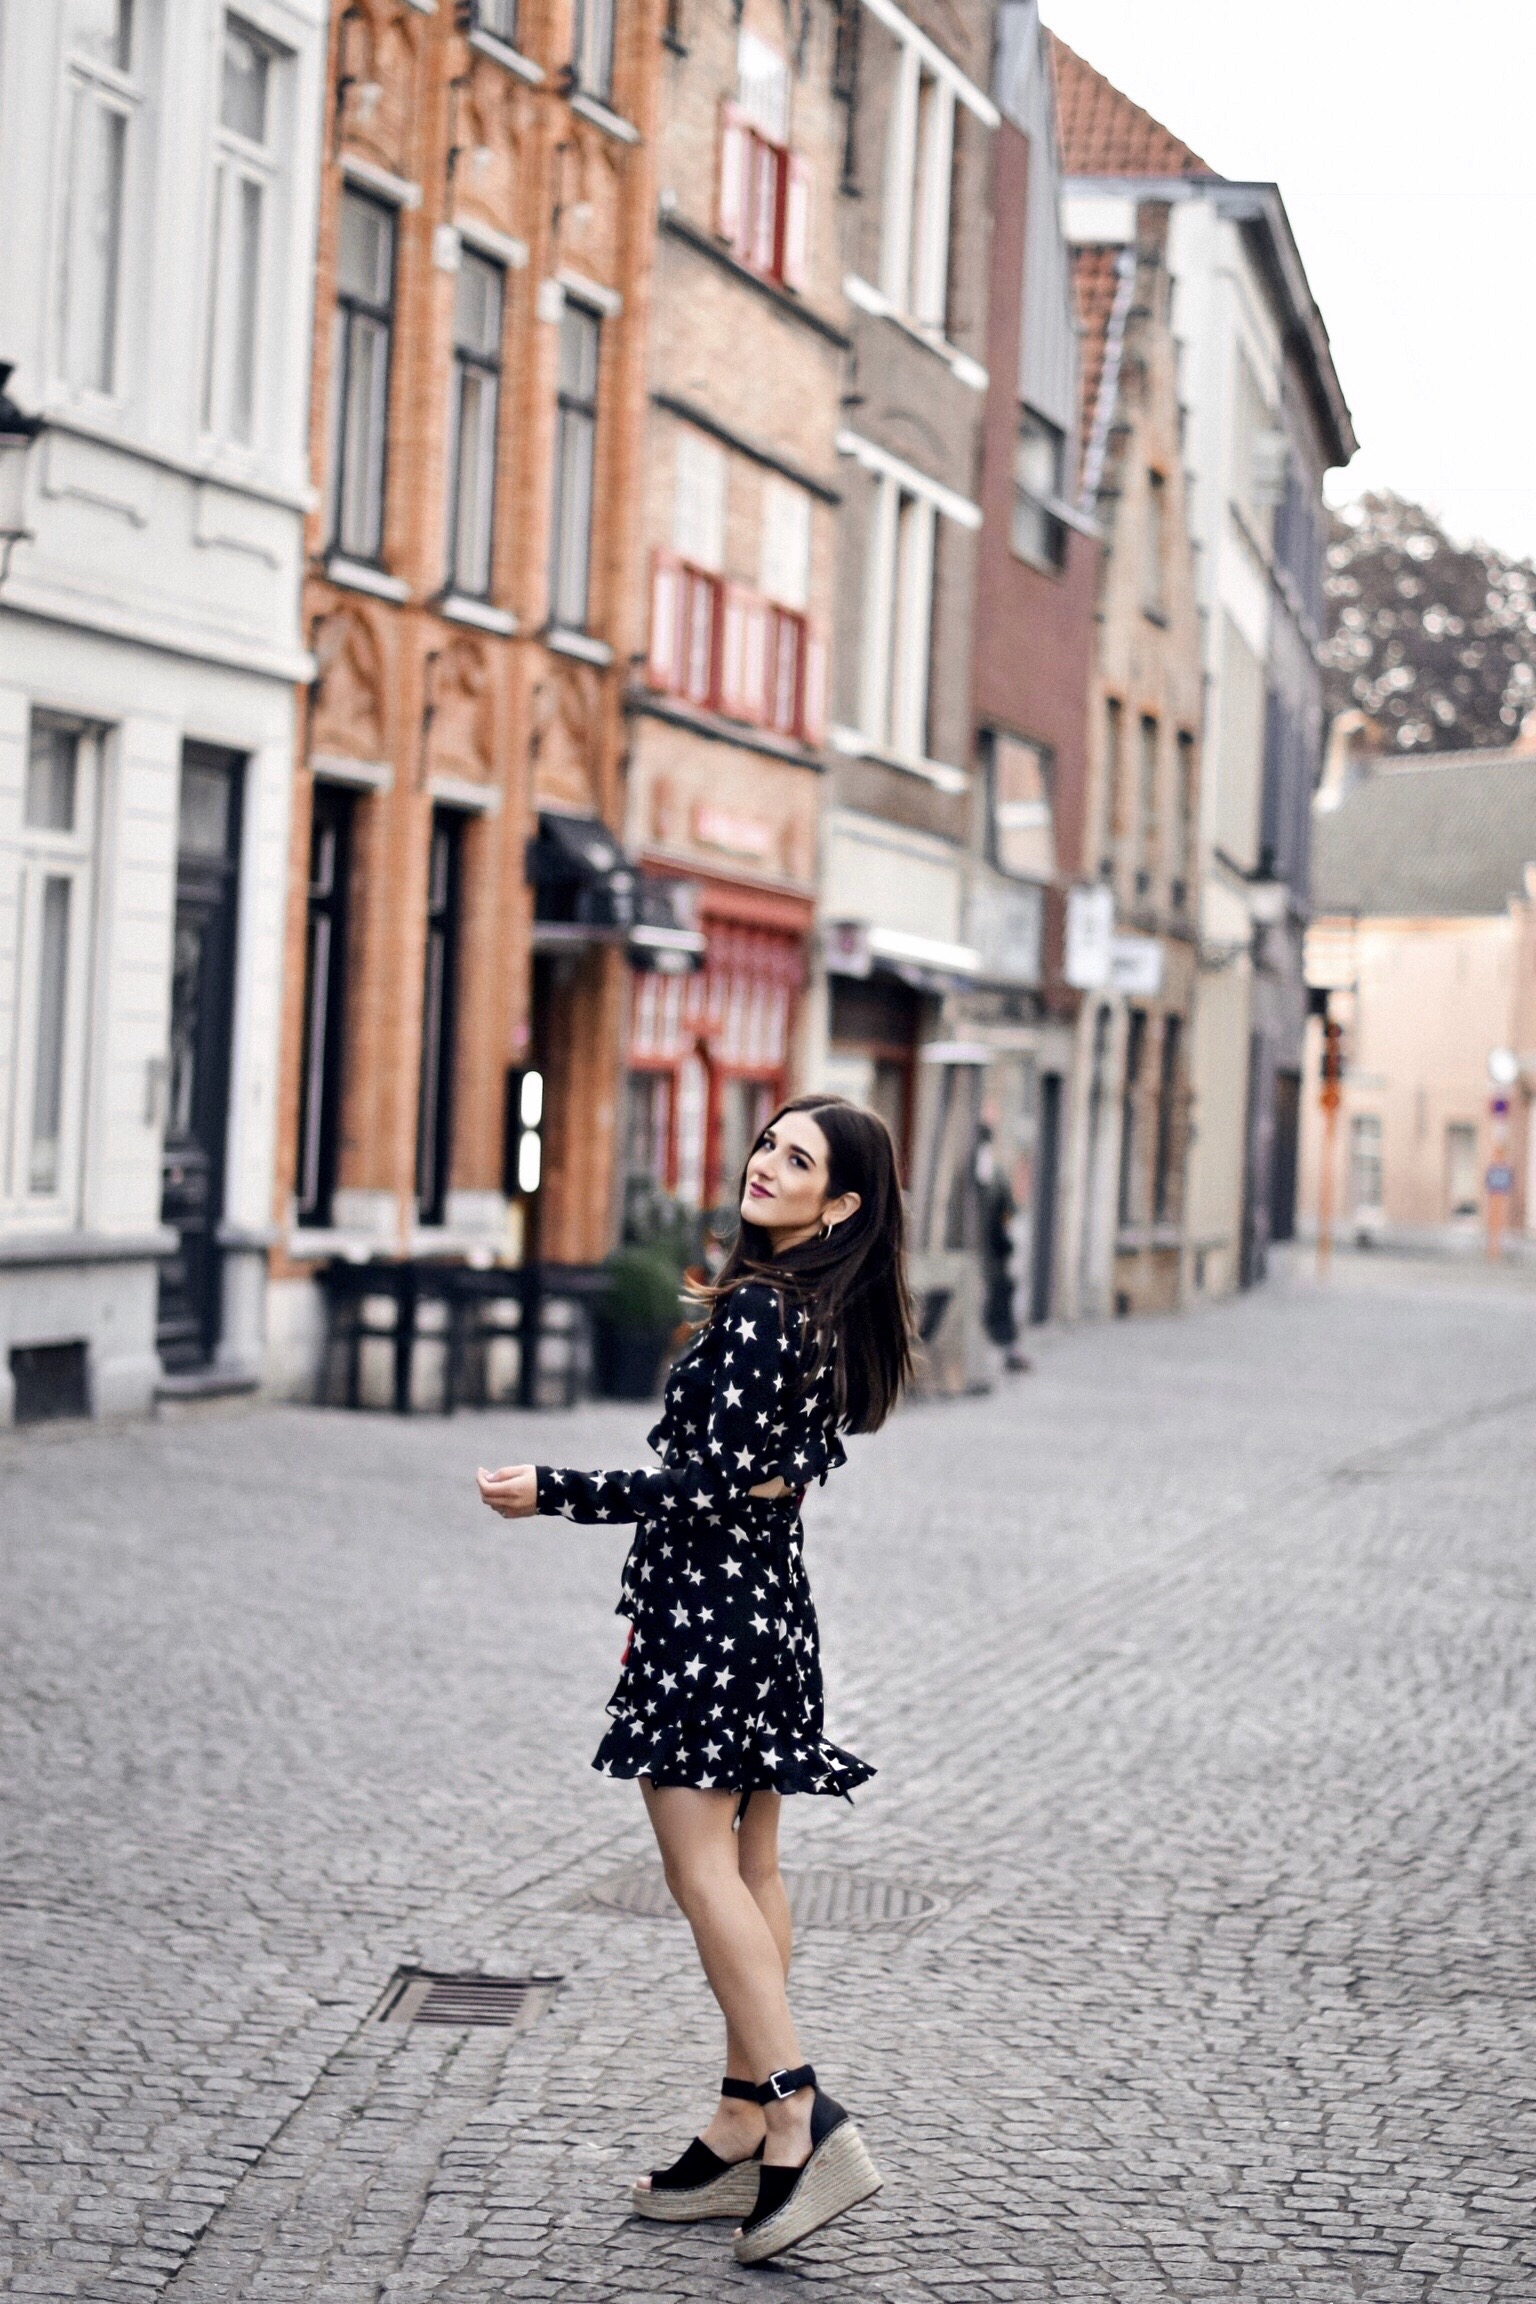 Belgium Travel Guide Bruges Ghent In 4 Days Esther Santer Fashion Blog NYC Street Style Blogger Outfit Sight Seeing Tourist Shop What How To Wear Expore What To Do Vacatiom Itinerary Short Stopover EuroTrip Europe Layover Summer Destination Country.jpg